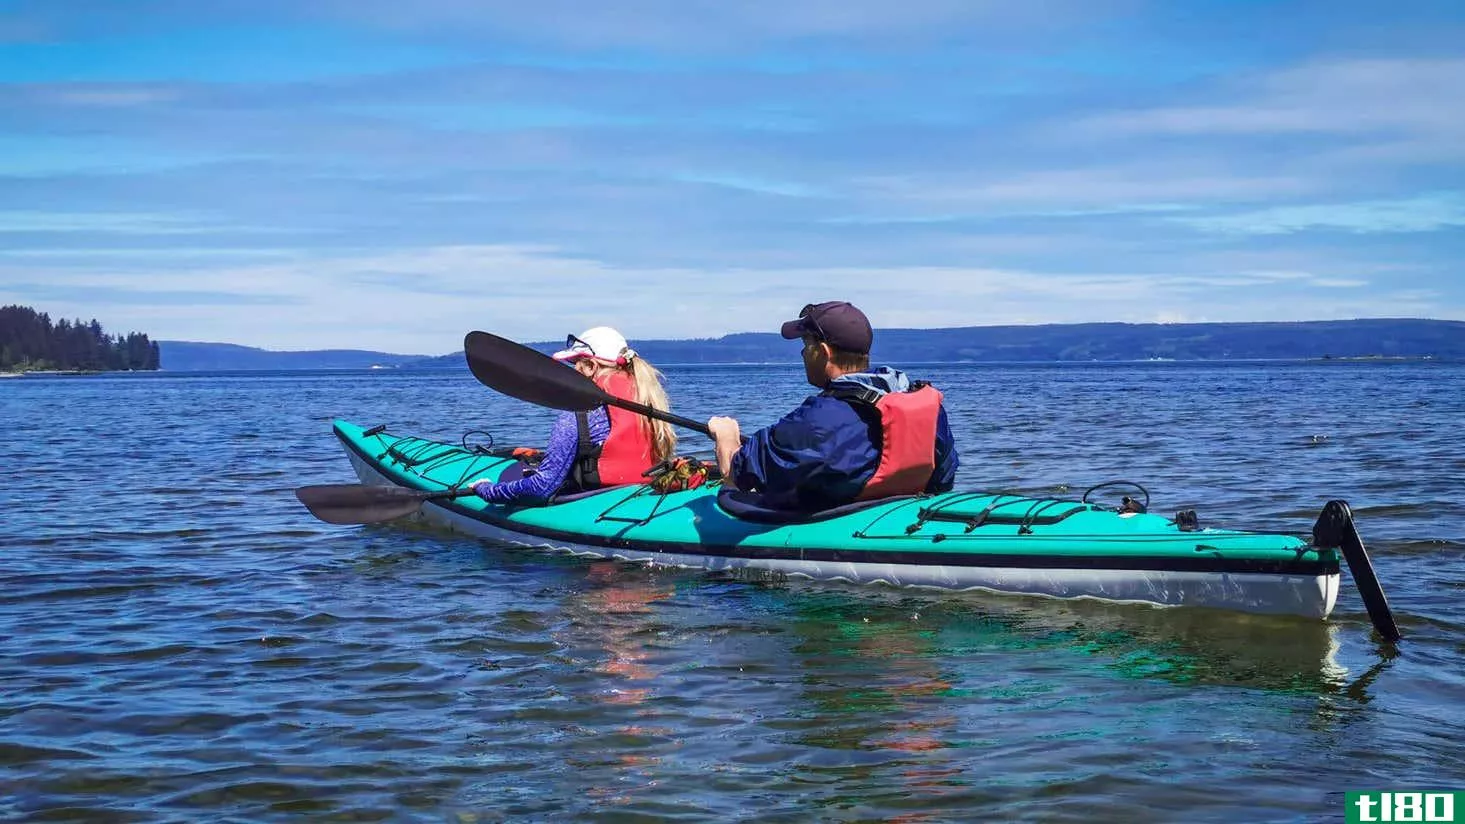 Kayakers wearing personal flotation devices (PFDS).